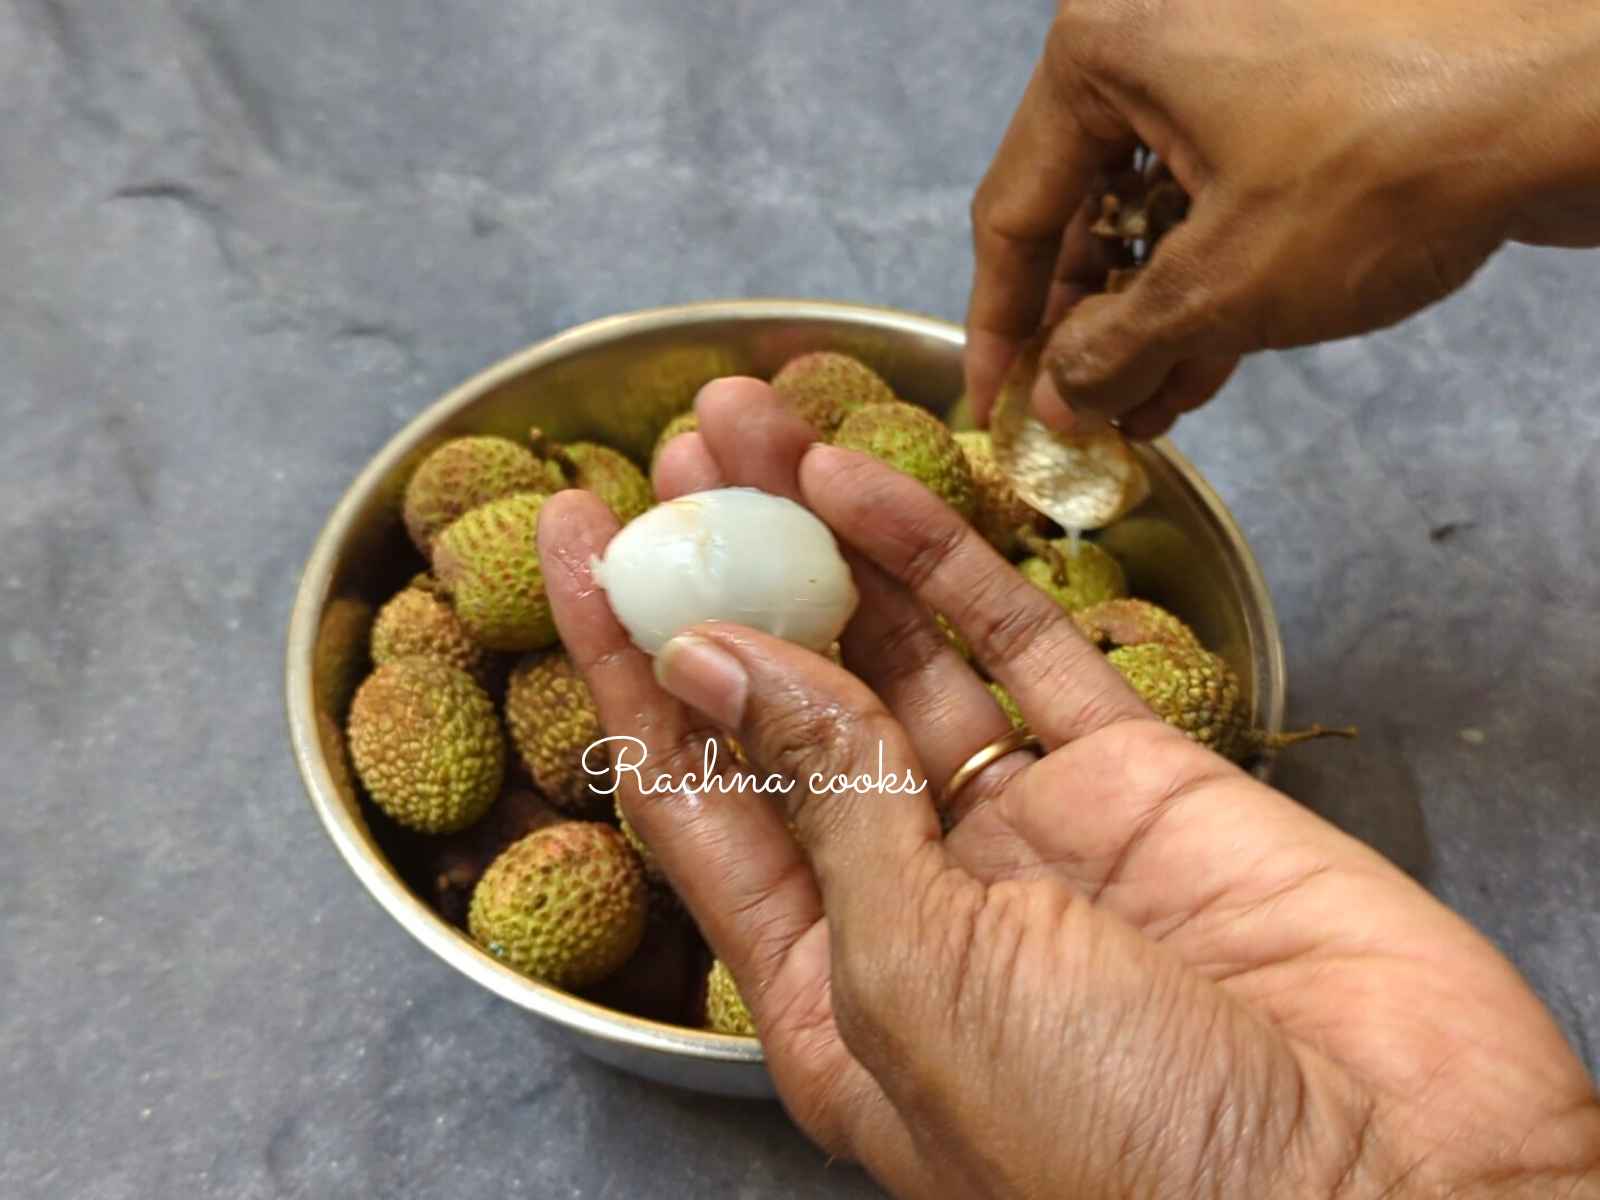 One lychee with flesh revealed after peeling off the skin.